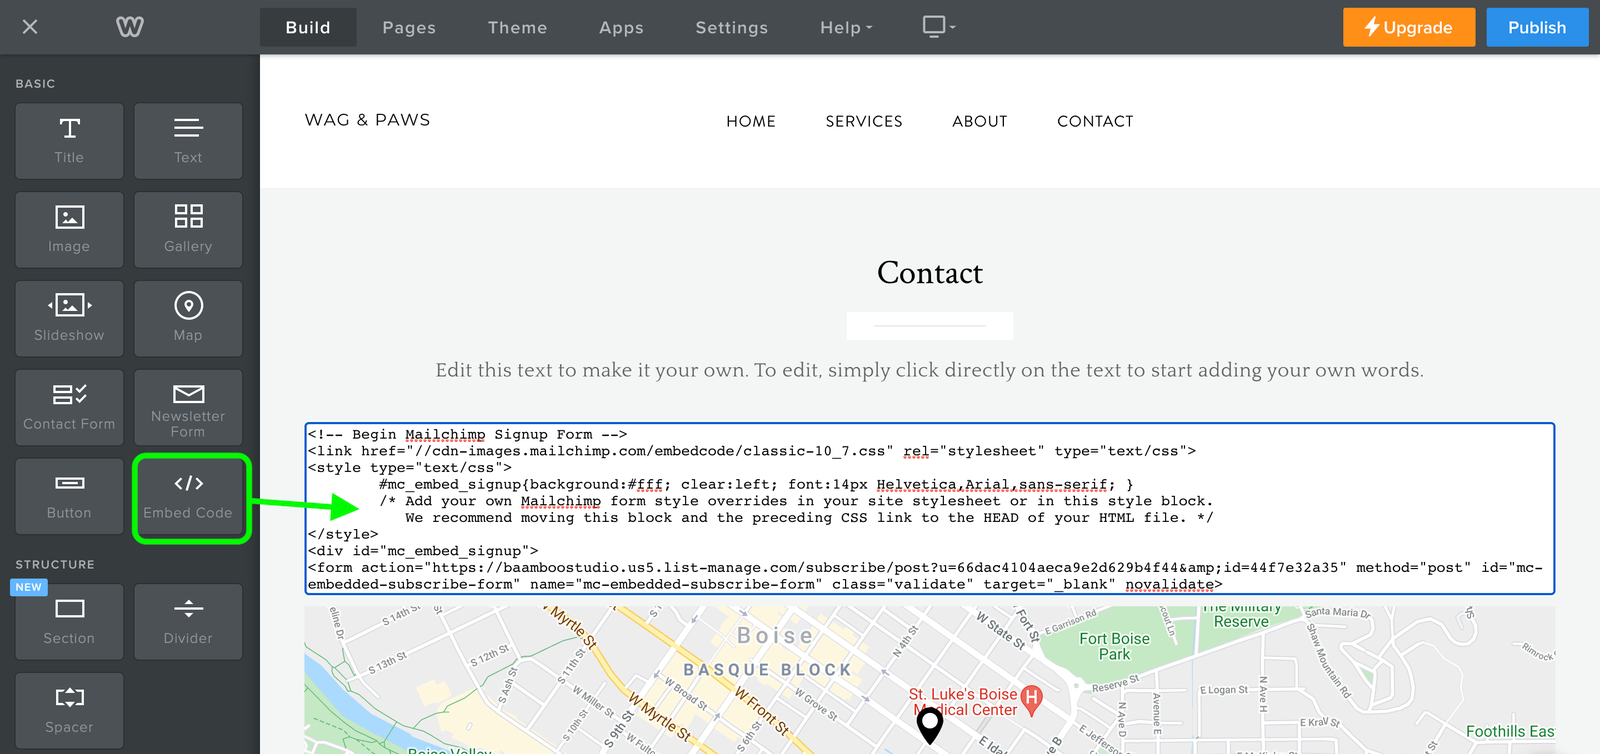 Step 3 - Paste the embedded code into a Weebly page